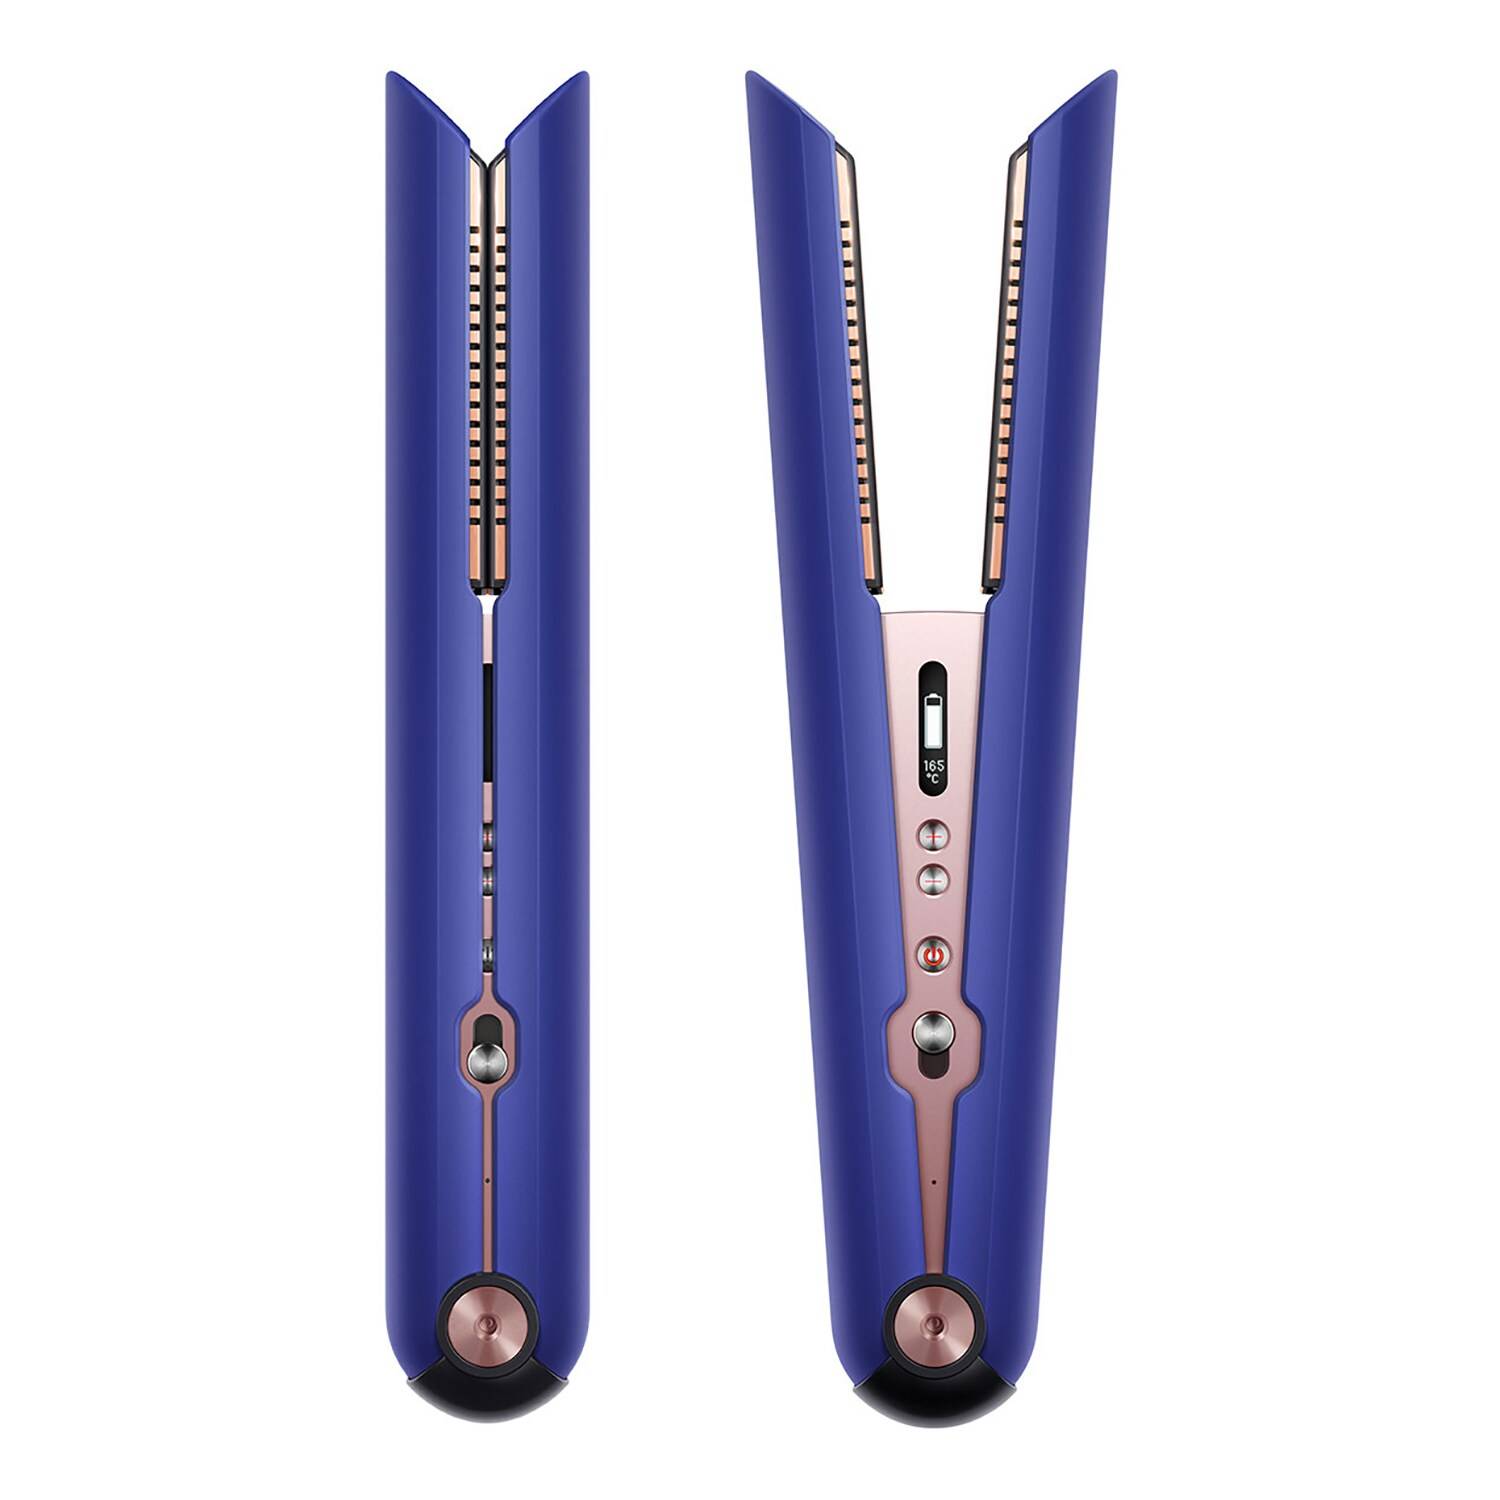 DYSON Special Edition Corrale� Hair Straighteners Vinca Blue/Ros�